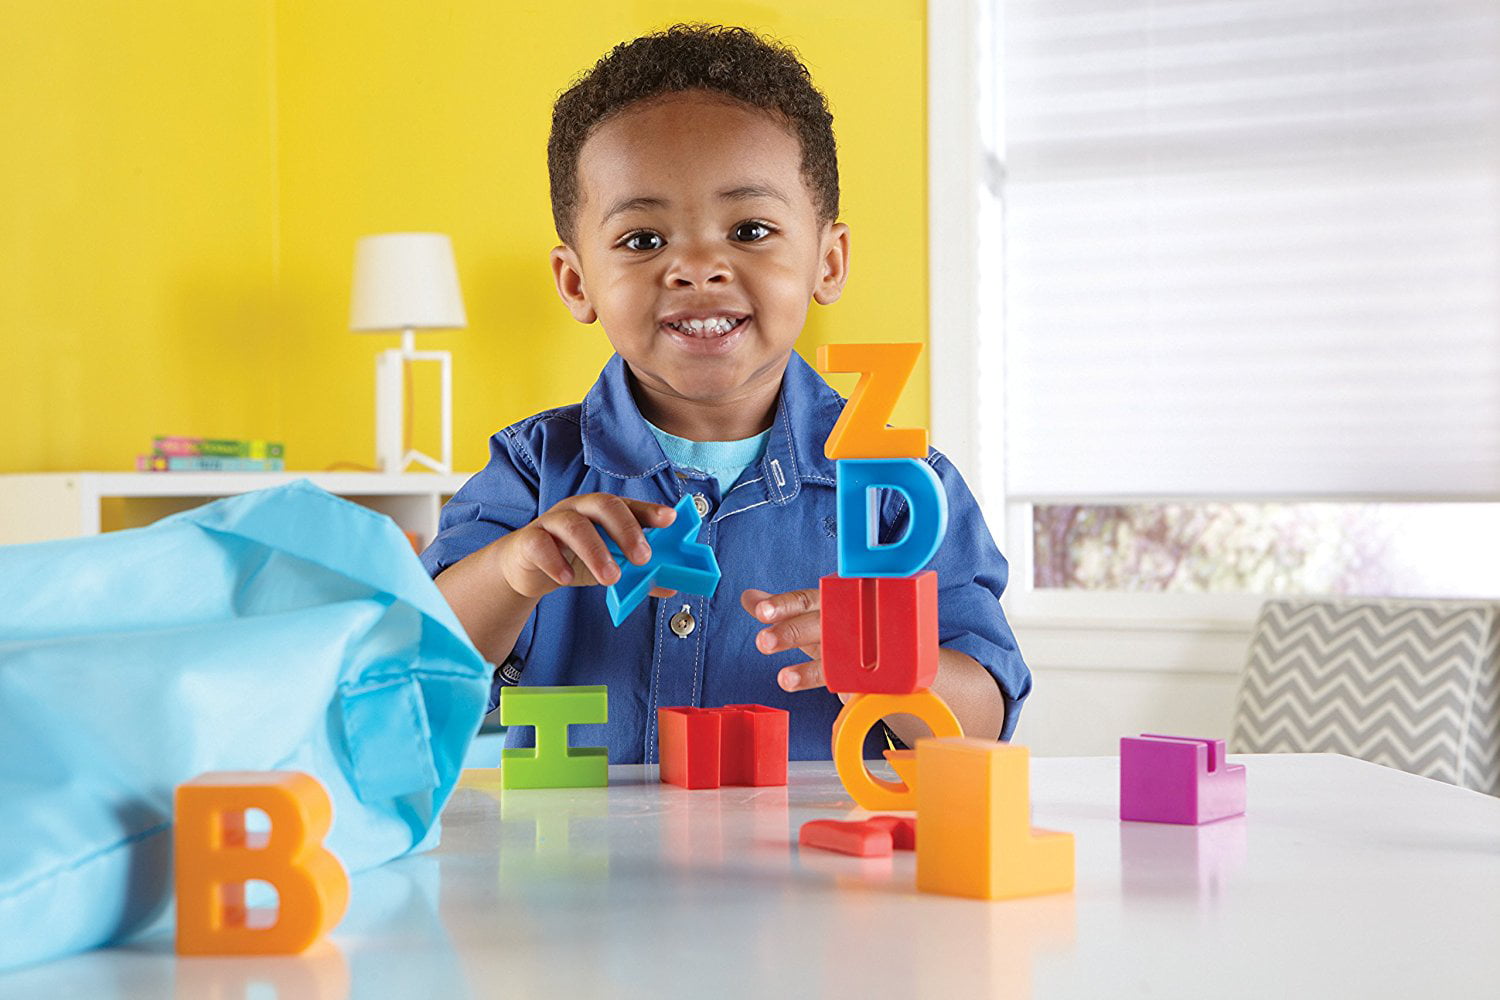 learning resources letter blocks